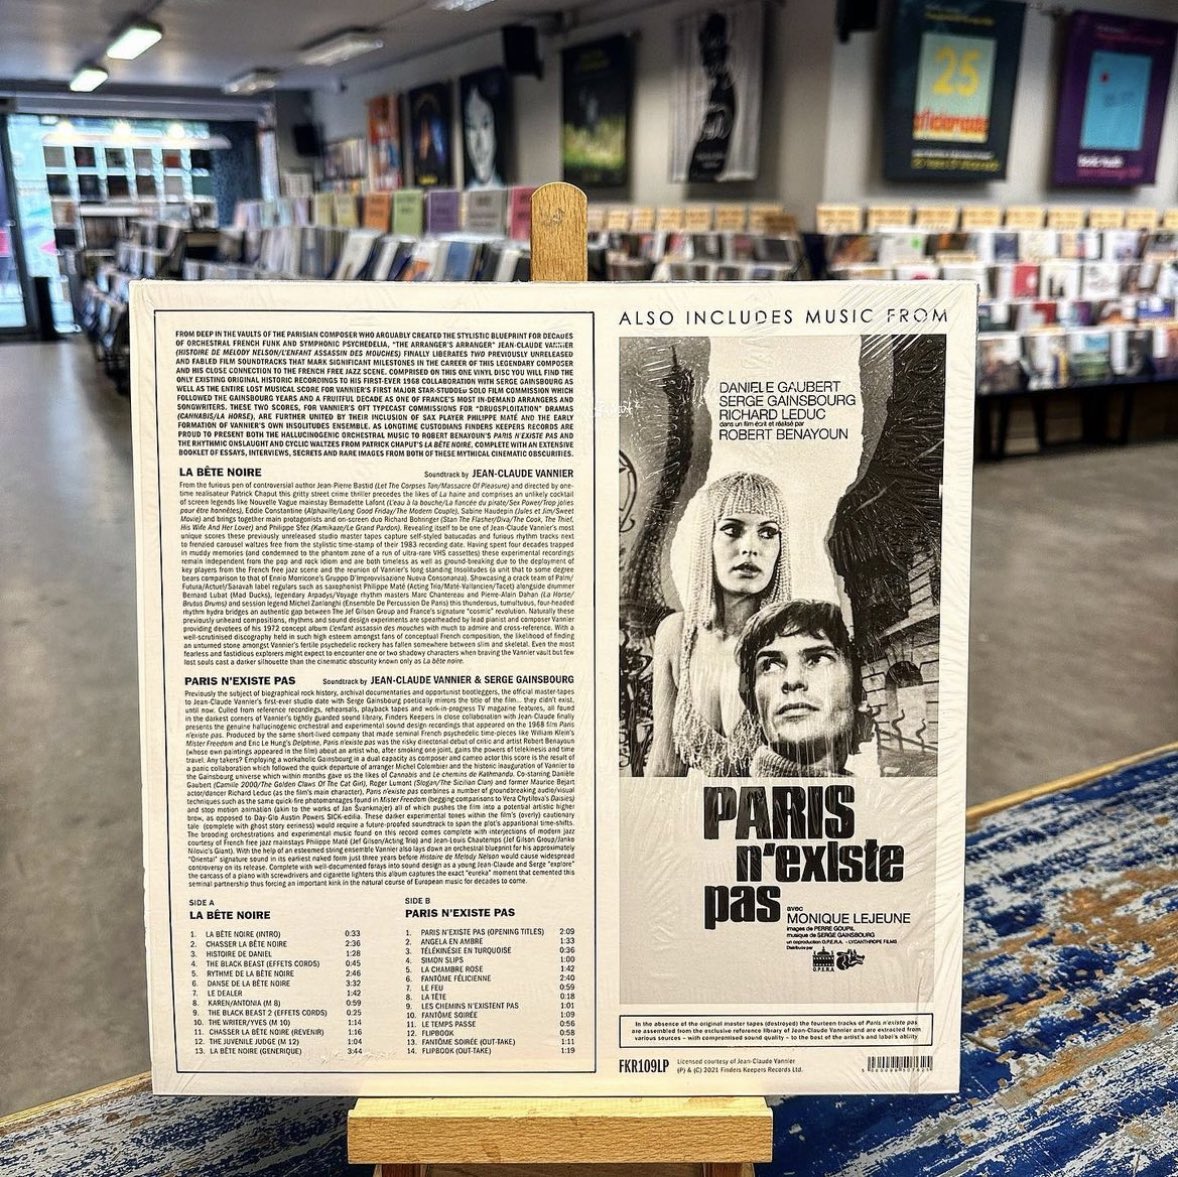 OPEN on this rainy Monday but we’re getting in the groove with this soundtrack from Jean-Claude Vannier - La Bête Noire/Paris N’Existe Pas released on Finders Keepers. piccadillyrecords.com/counter/search… Comes w/ booklet of essays, interviews and rare images. @AndyVotel @KeepersFinders